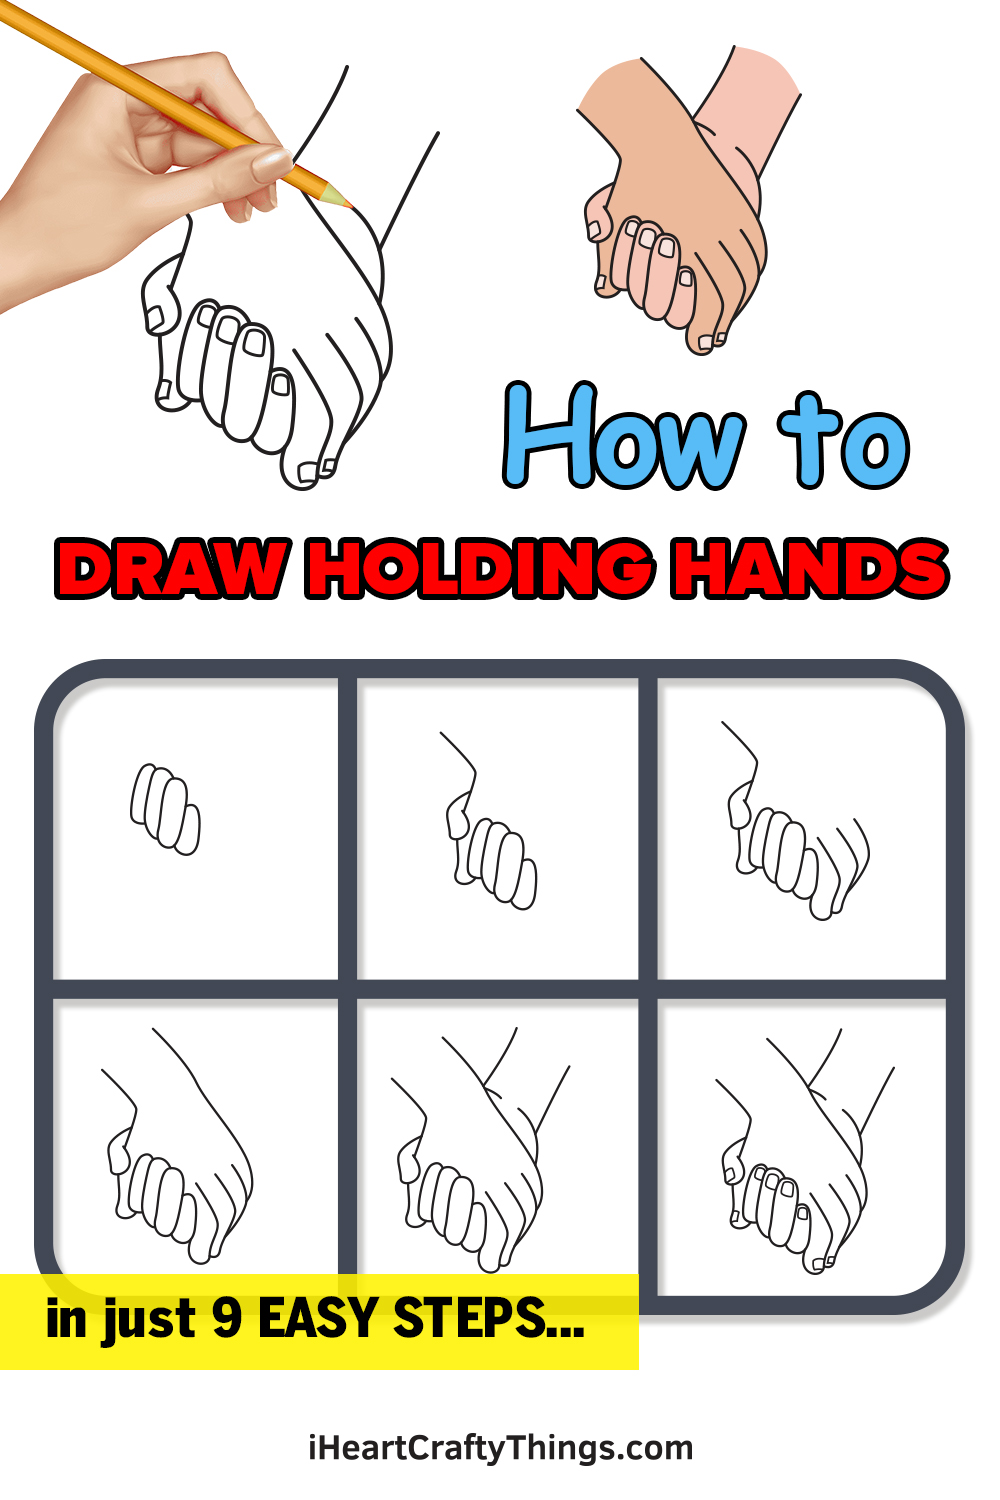 how to draw holding hands in 9 easy steps